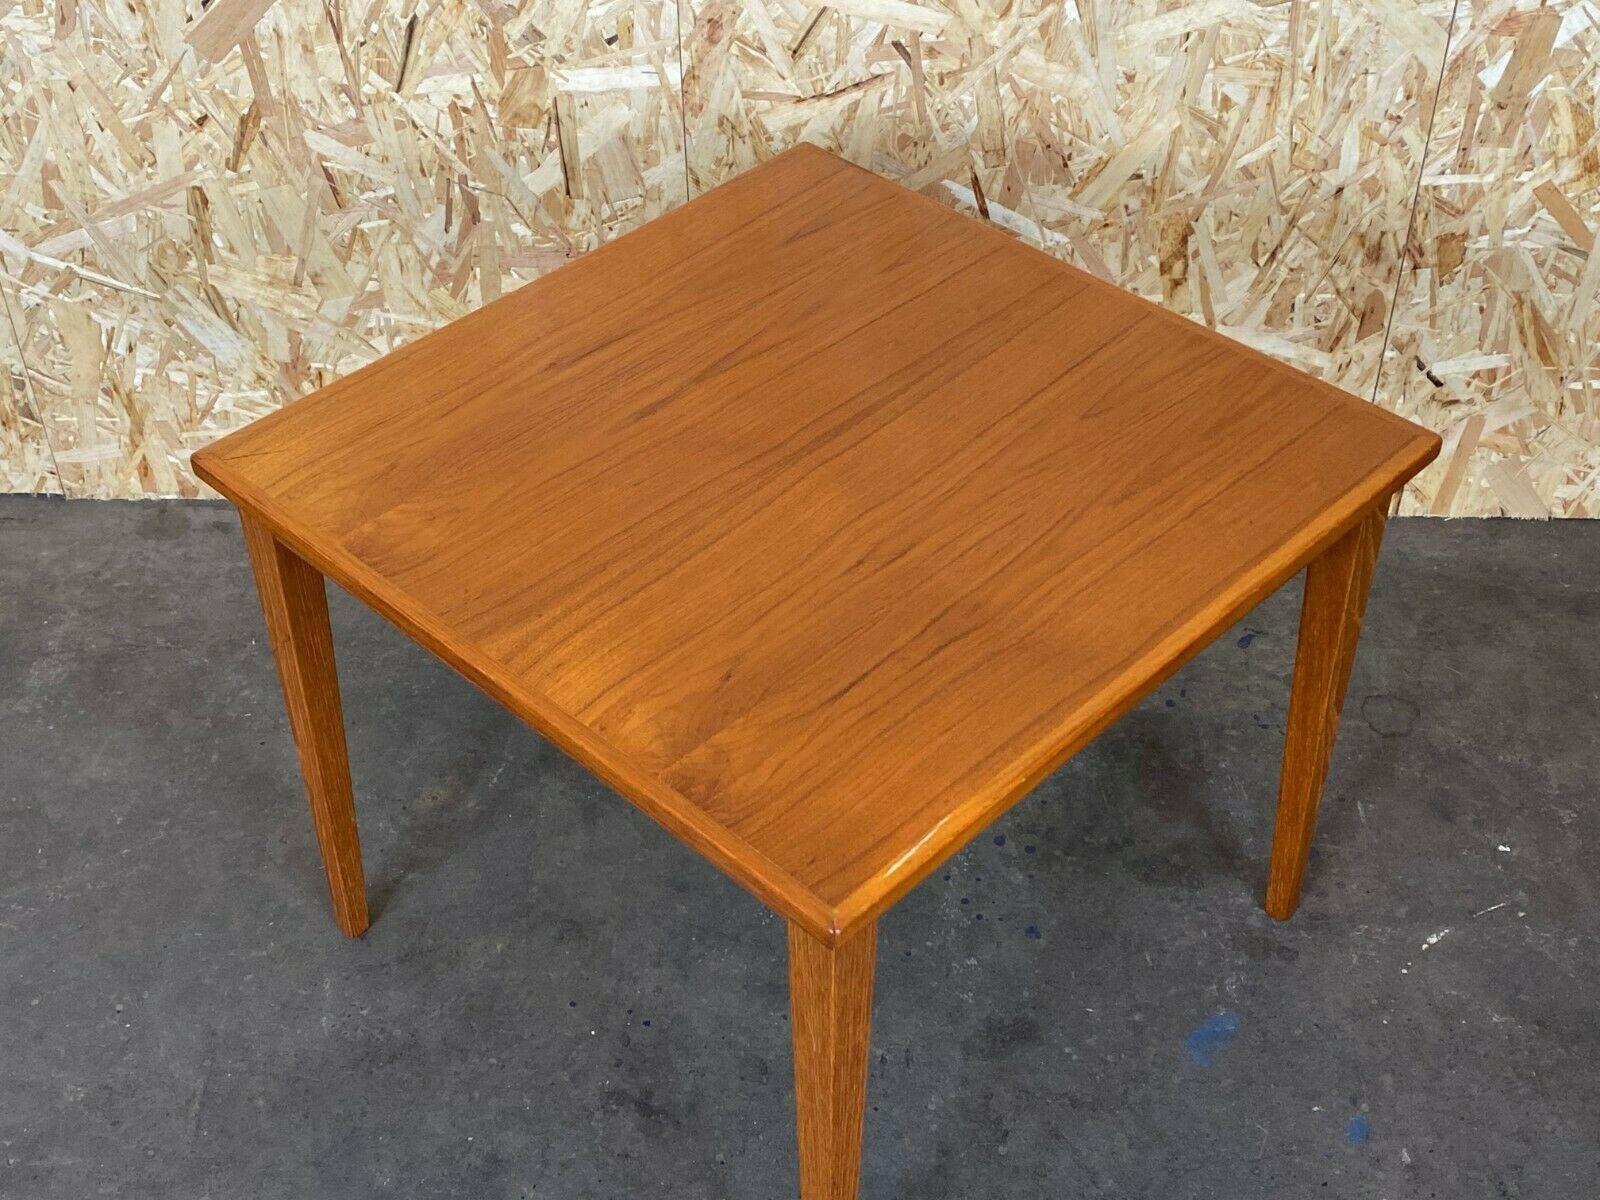 60s 70s Teak Table Coffee Table Side Table Kvaletit Danish Modern Design In Good Condition For Sale In Neuenkirchen, NI